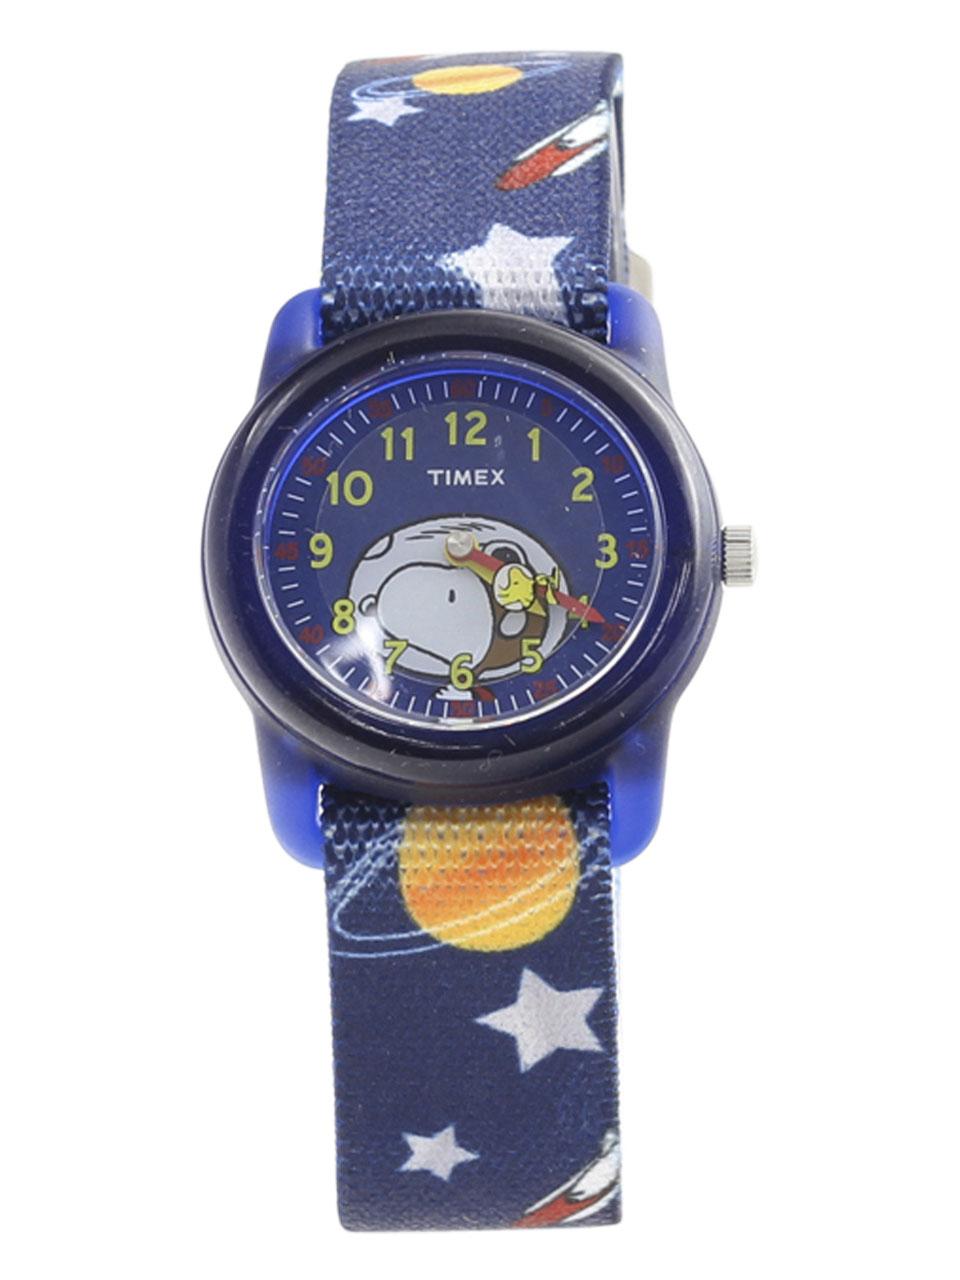 Timex Tw2r41800 Time Machines Peanuts Collection Snoopy Blue Space Analog Watch